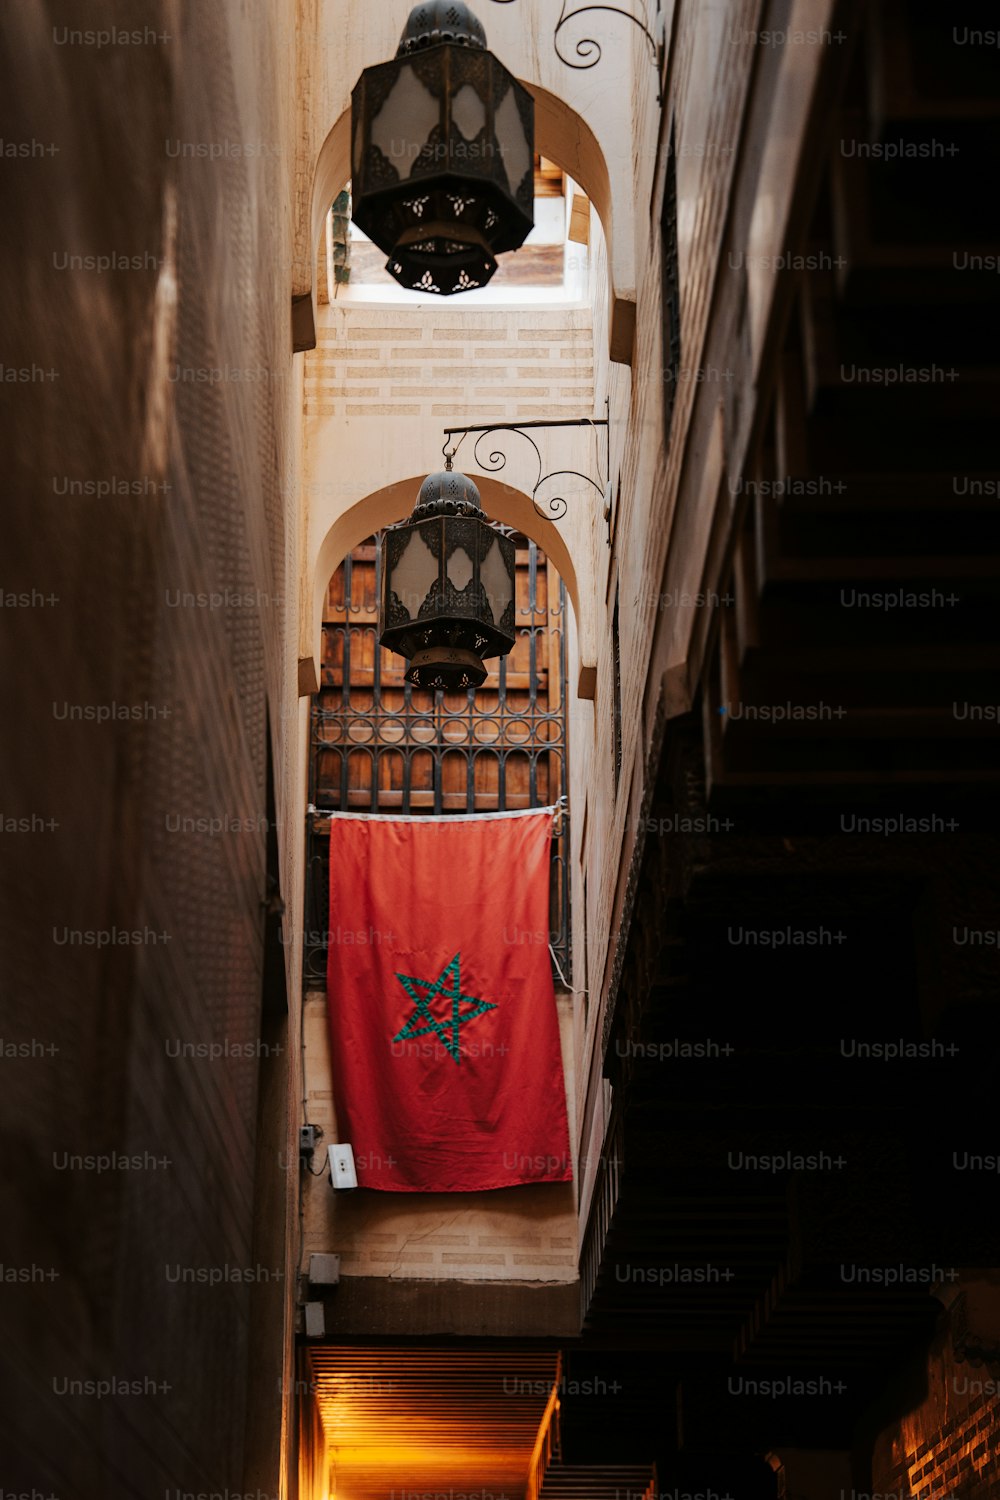 a narrow alleyway with a red flag hanging from the ceiling